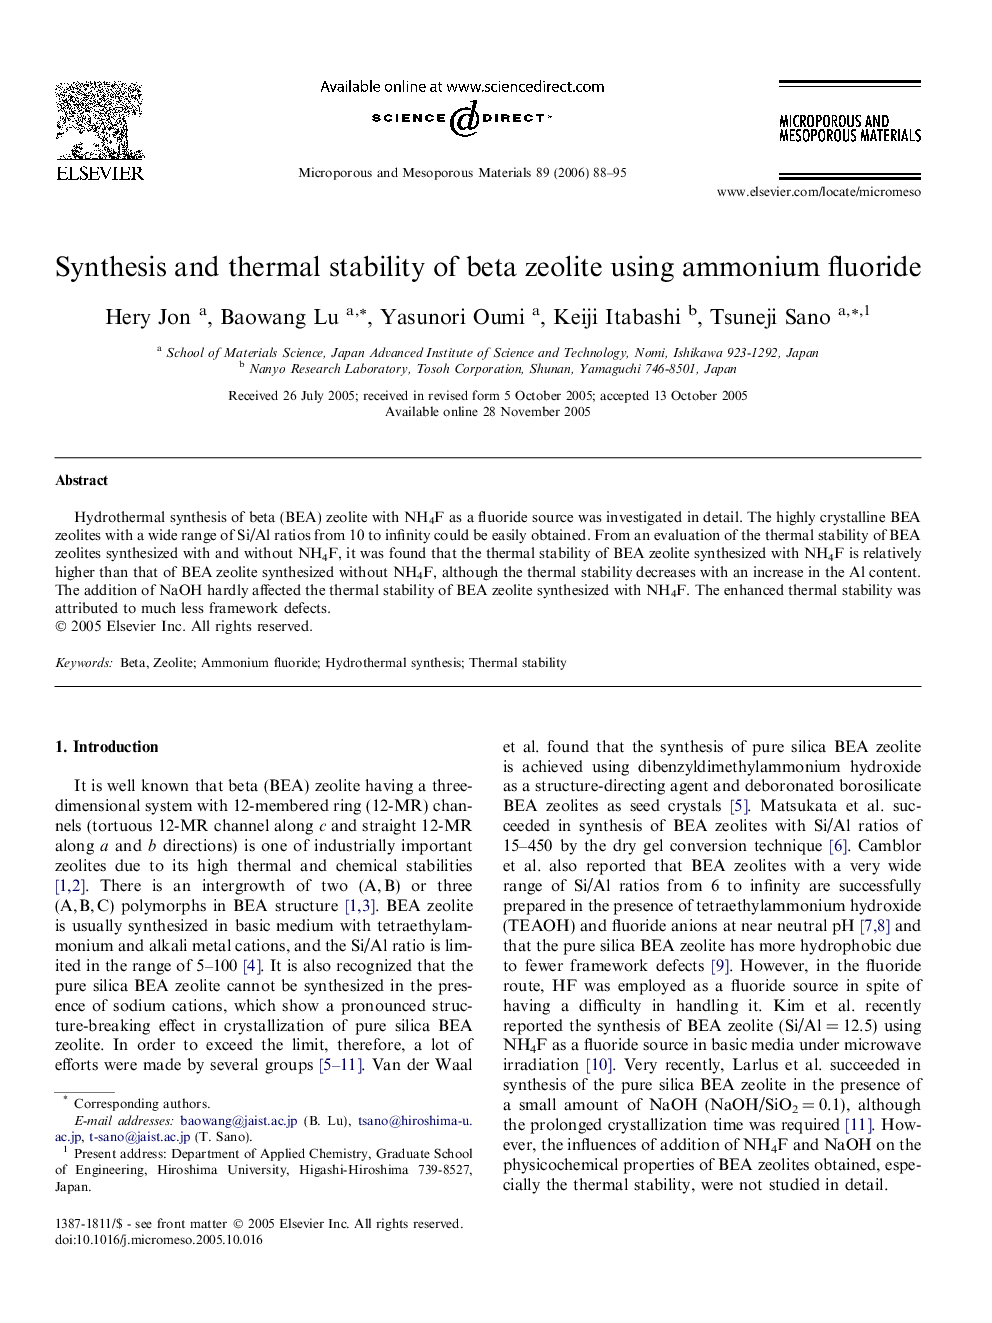 Synthesis and thermal stability of beta zeolite using ammonium fluoride